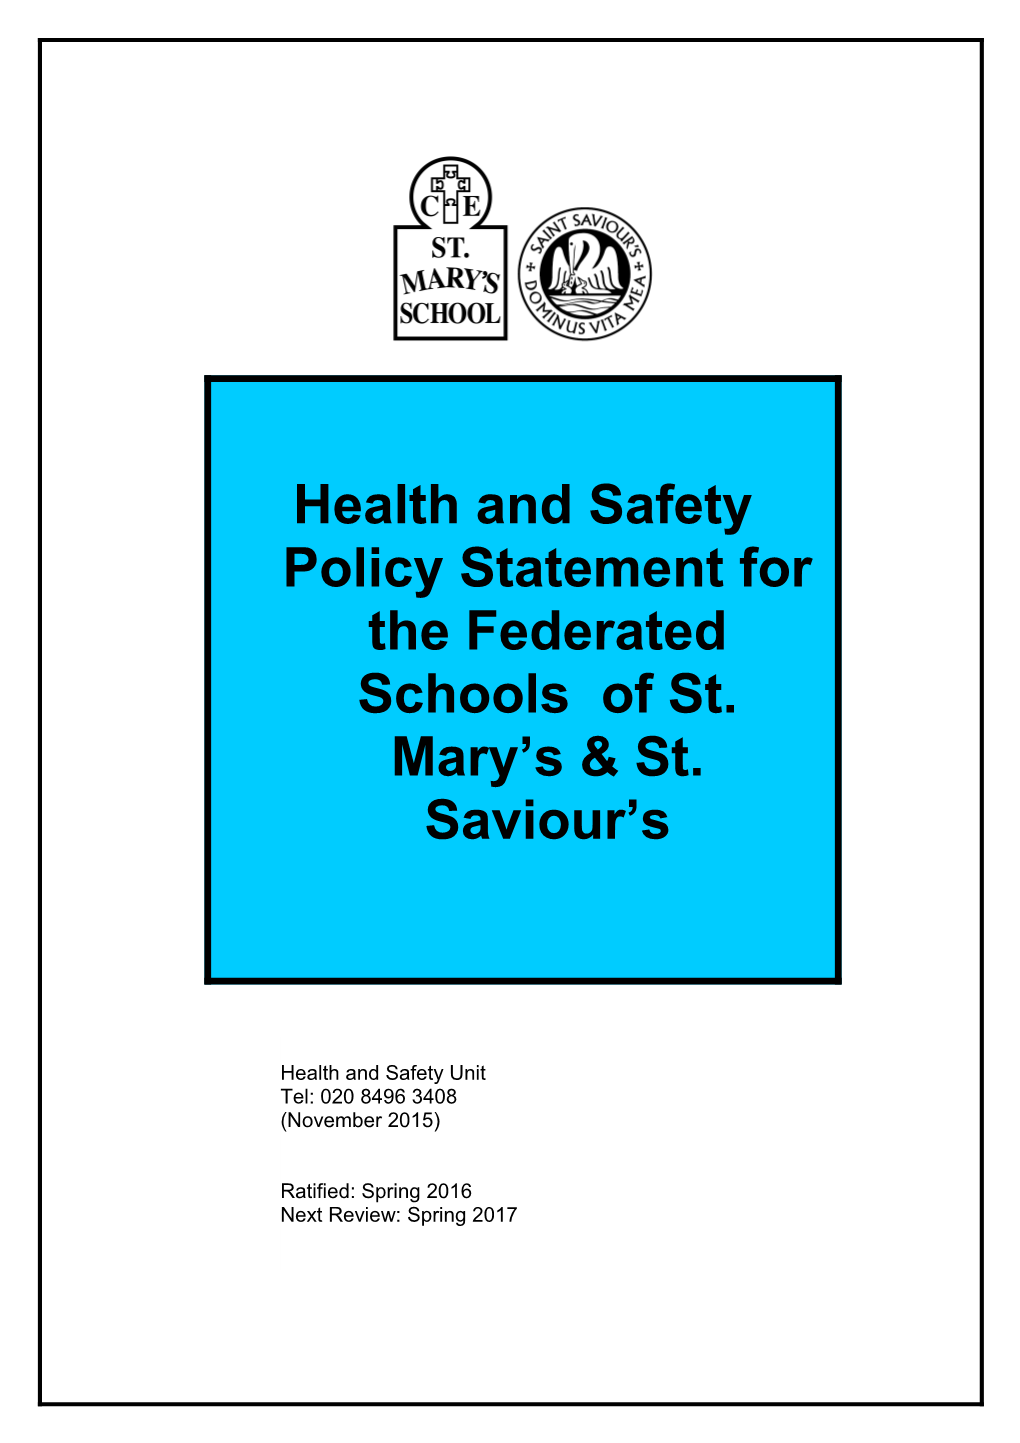 Health and Safety Policy Statement for Schools